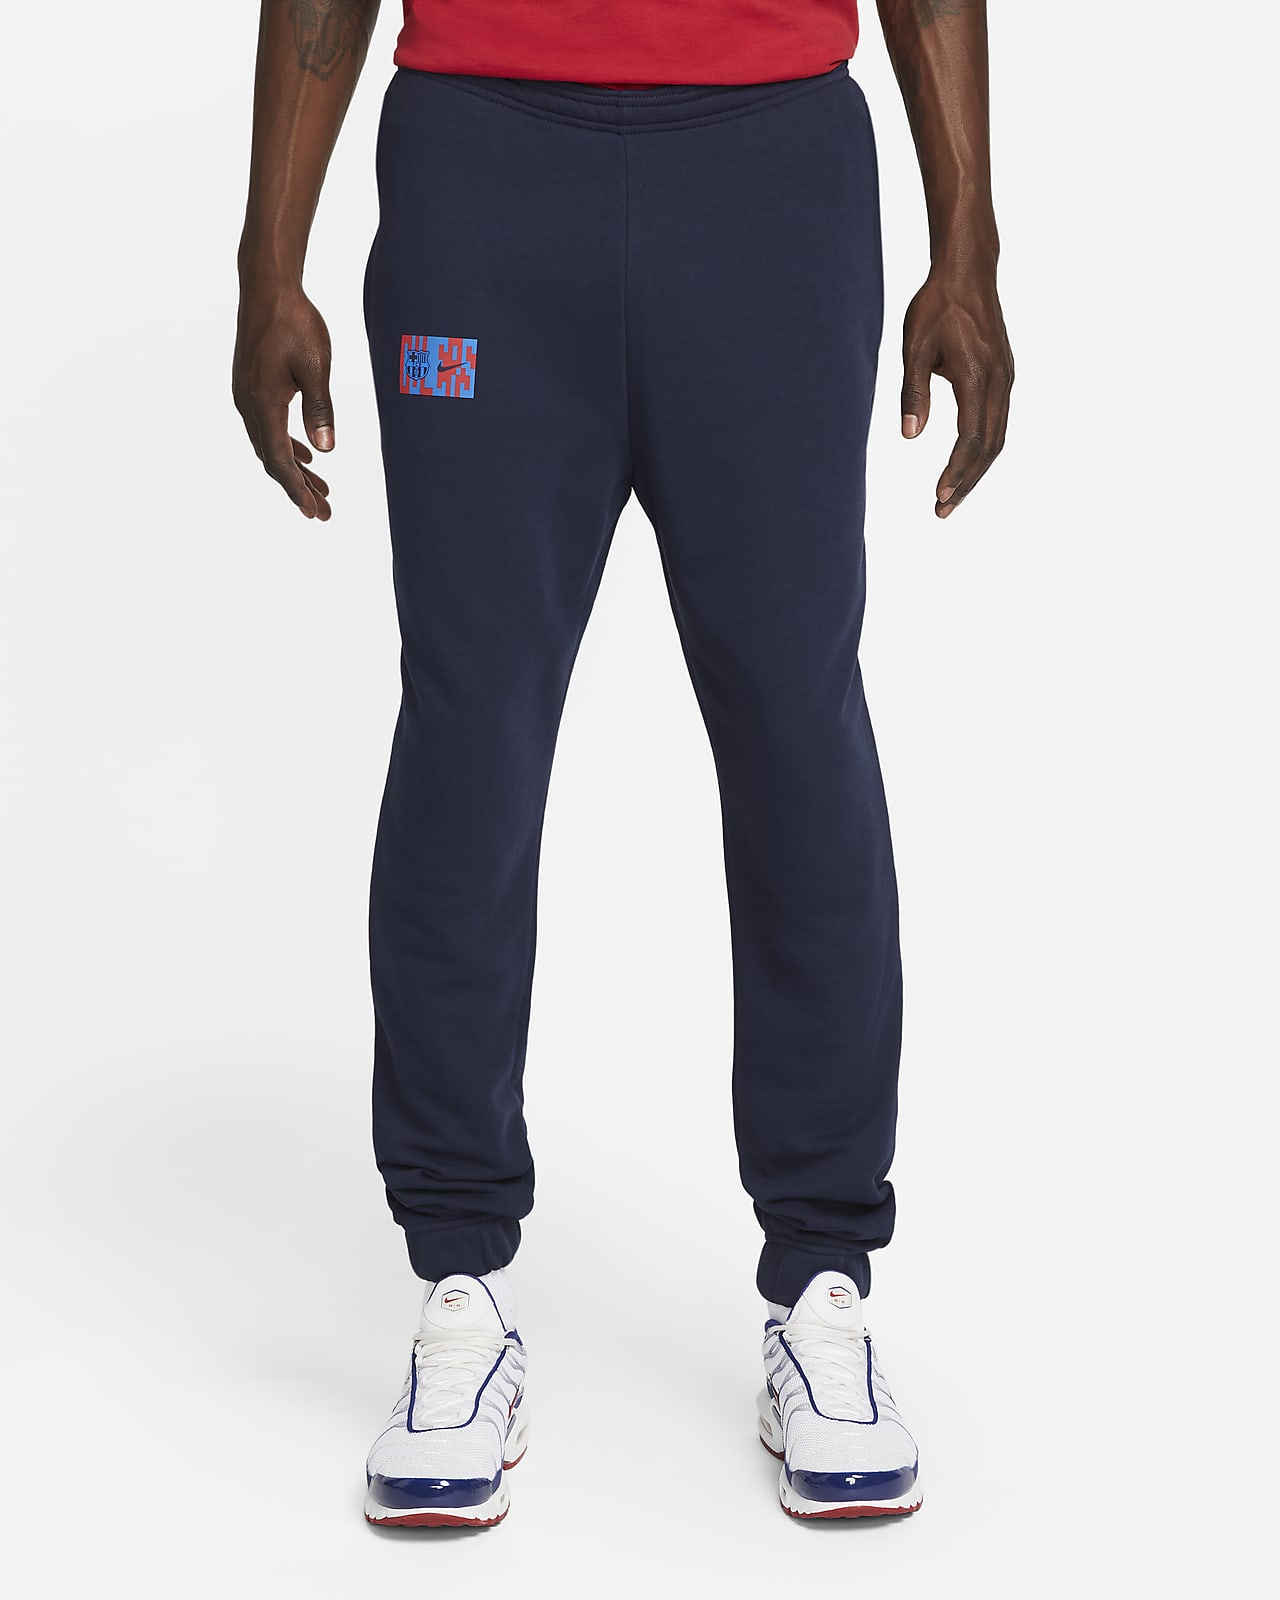 FC Barcelona Men's French Terry Soccer Pants.